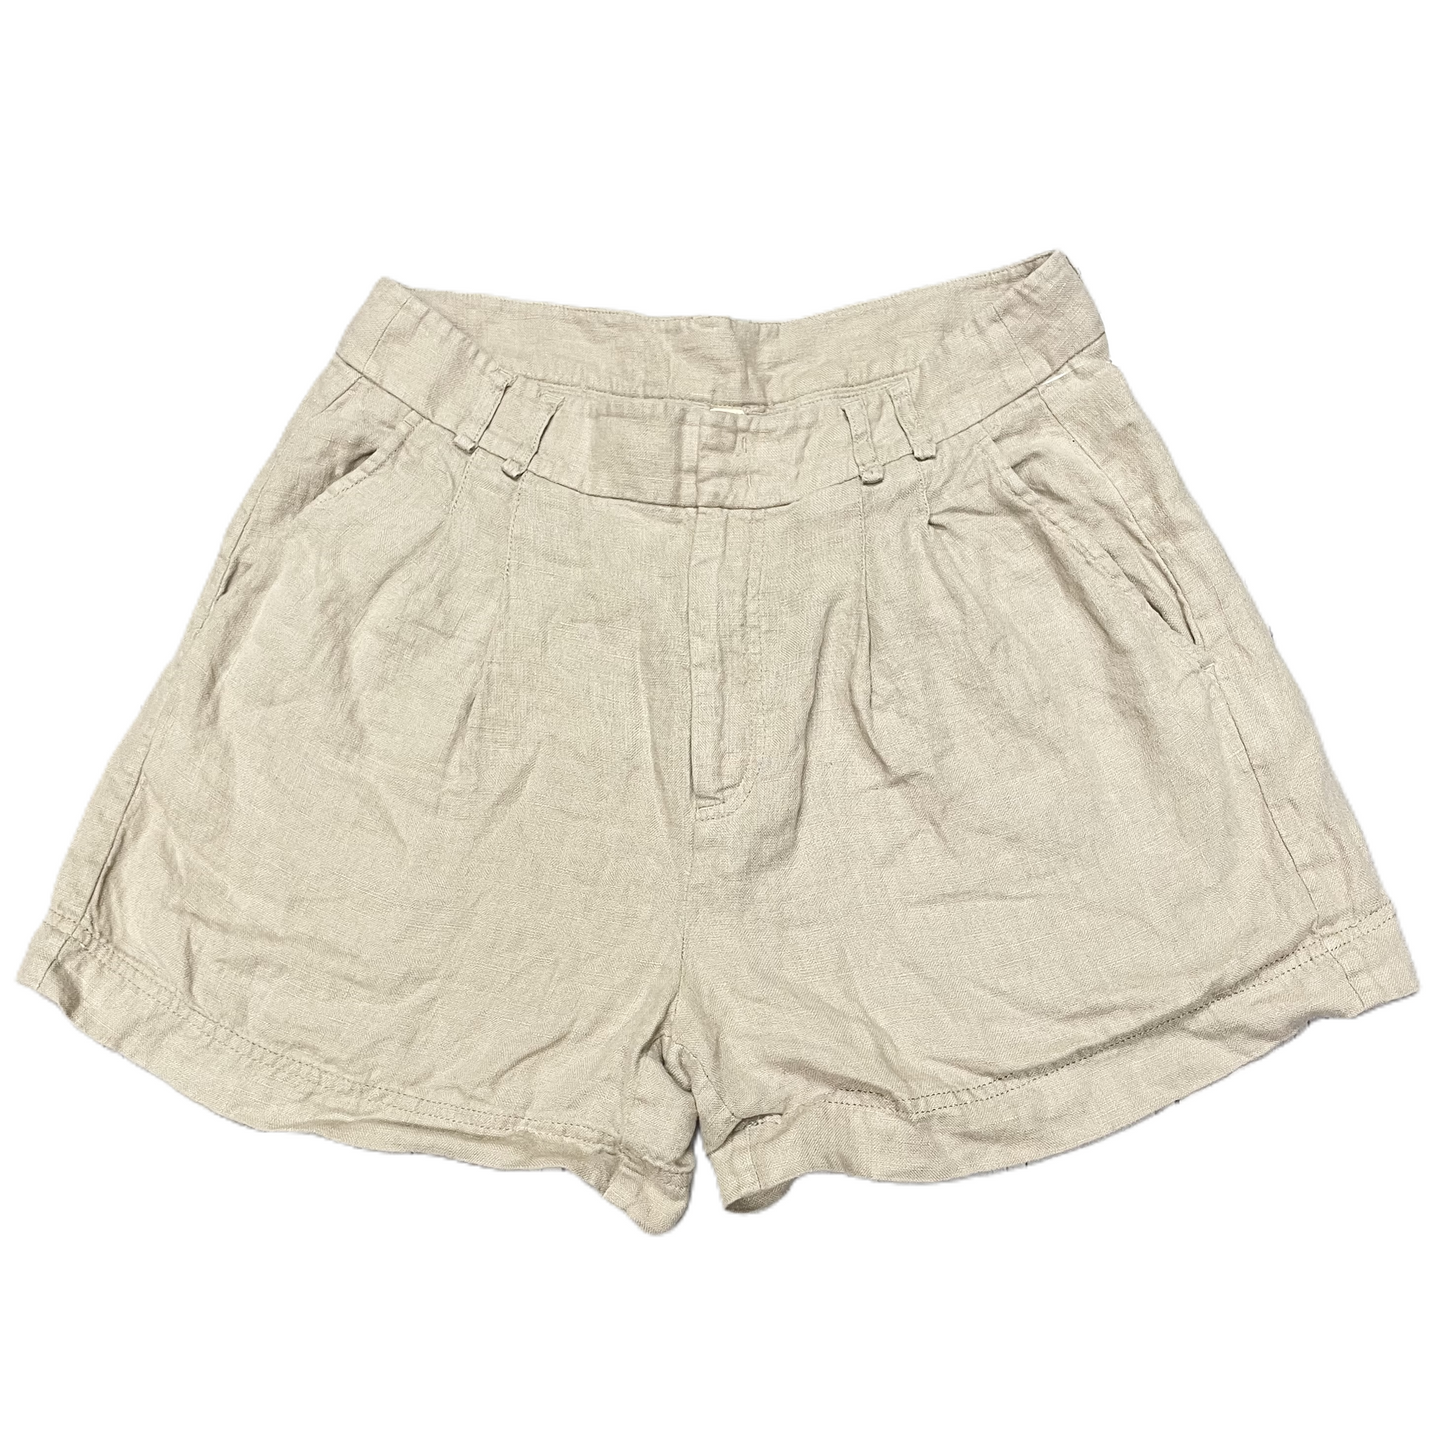 Tan Shorts By Free People, Size: 6